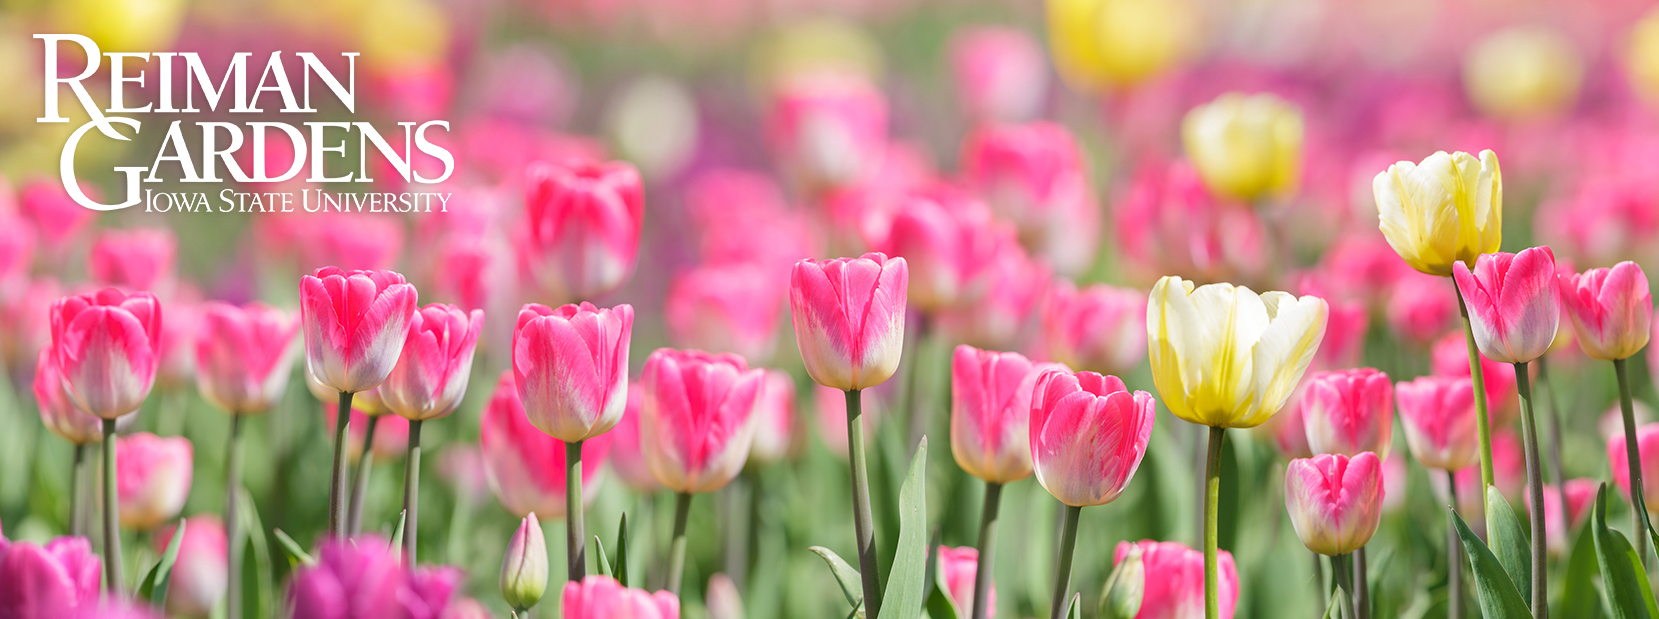 Pink and yellow tulips and Reiman Gardens logo